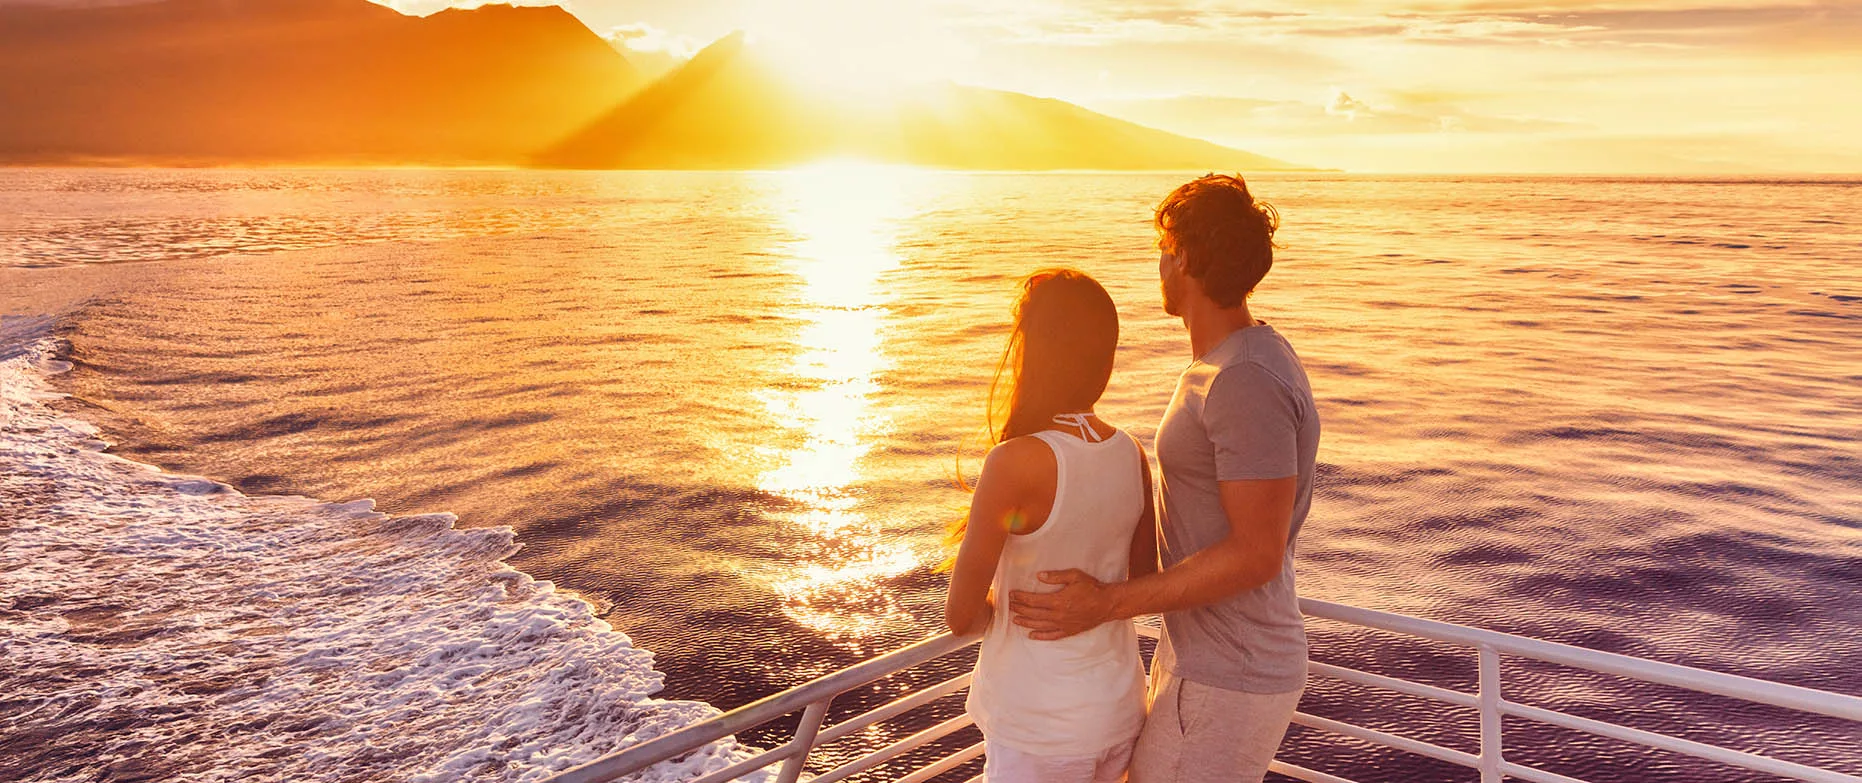 The Best Cruises For Couples